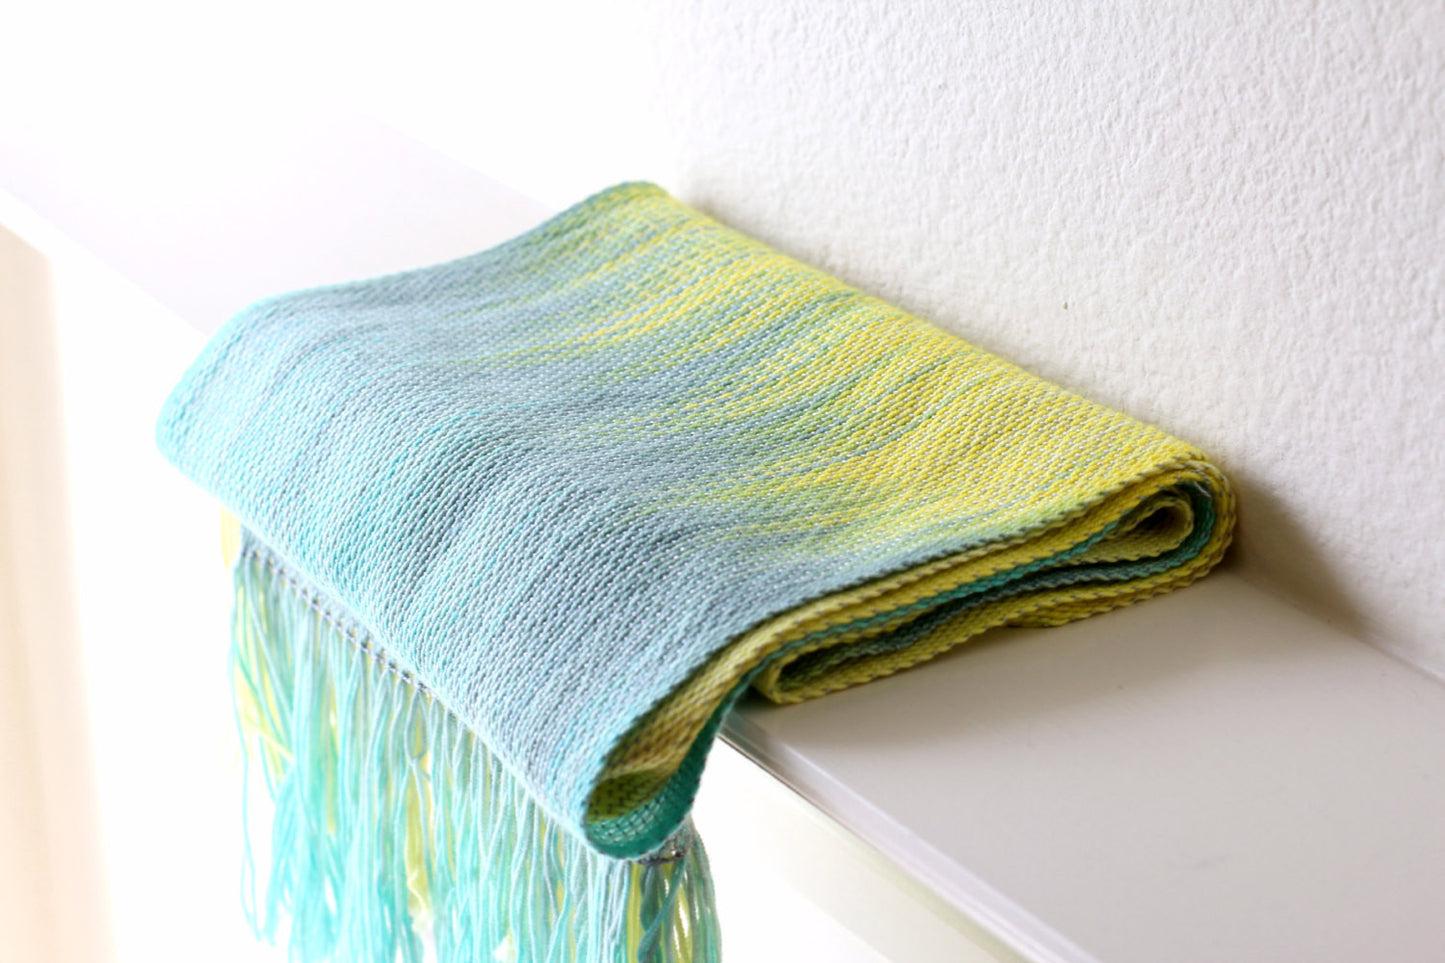 Woven scarf in yellow and grey blue colors